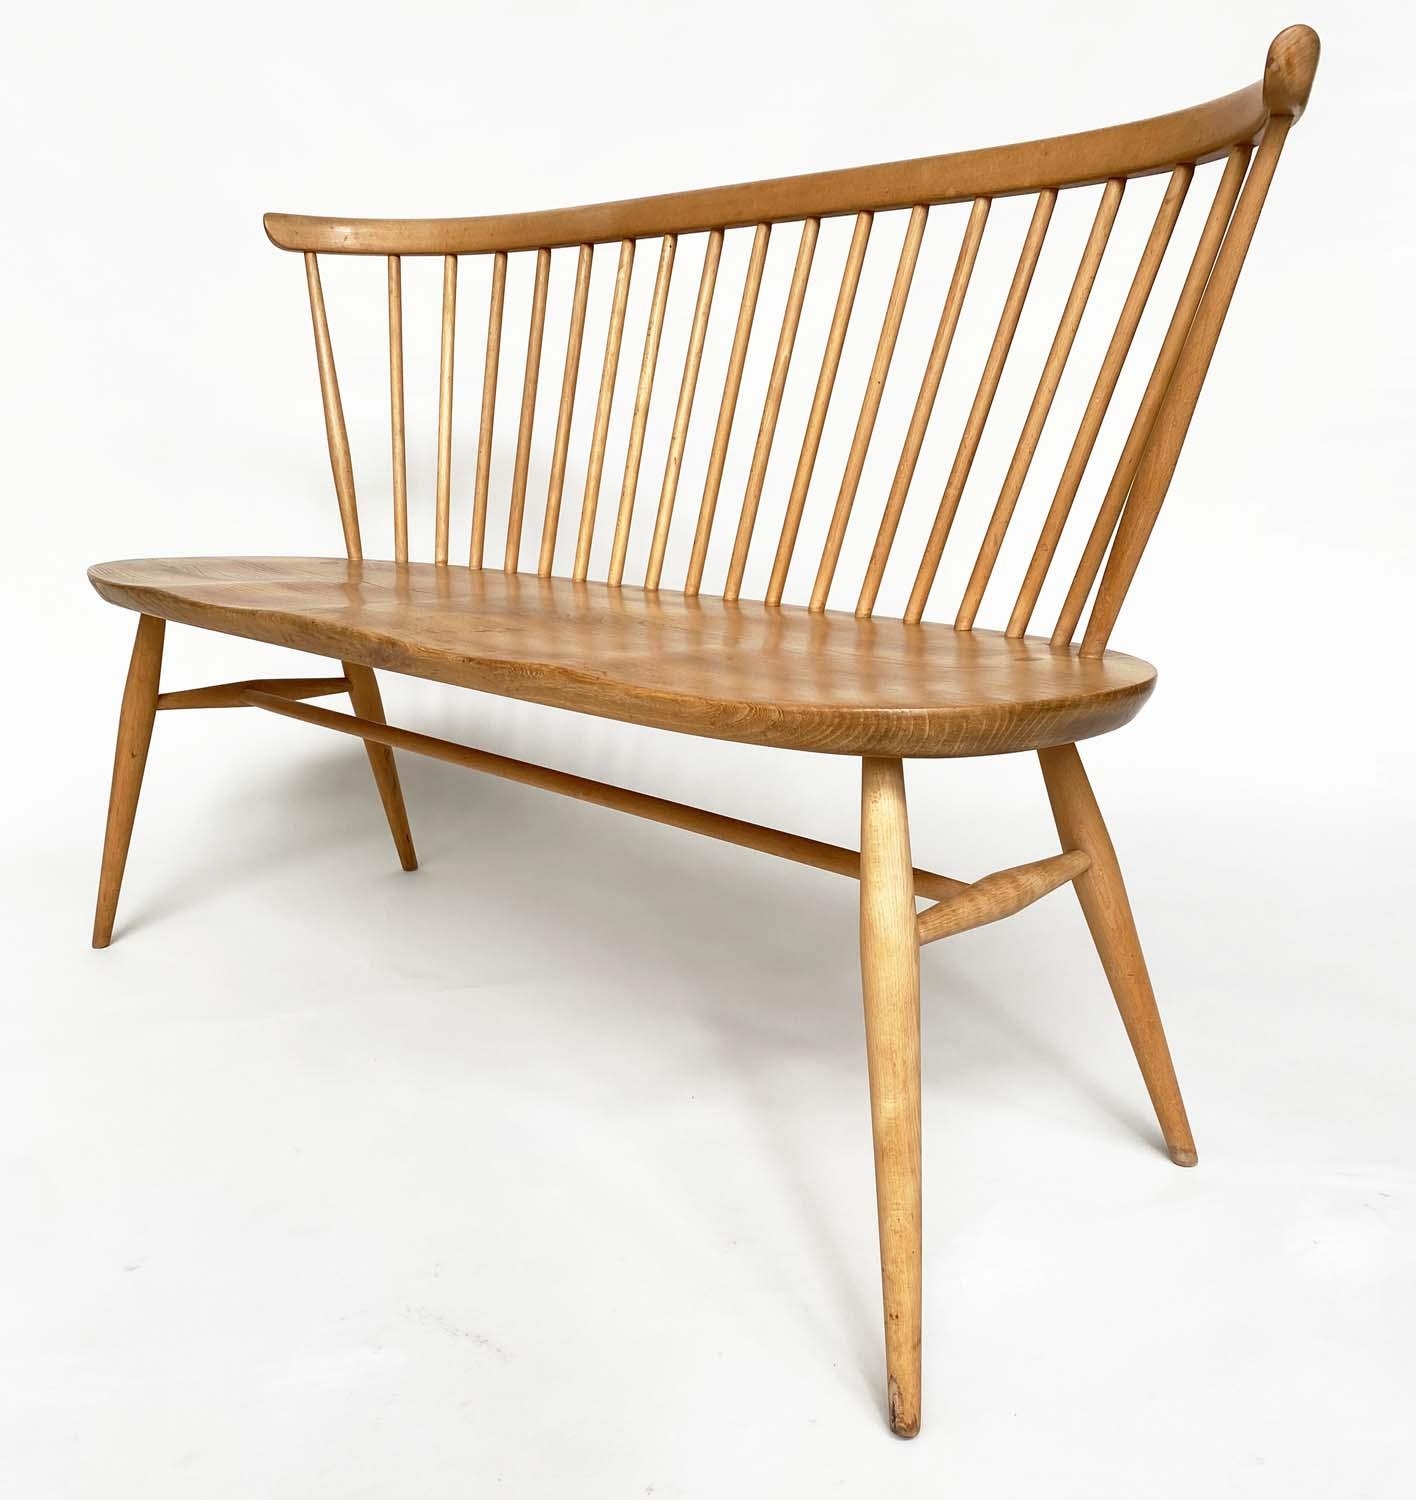 'ERCOL' HALL BENCH, 1970s beech and elm with slightly arched spindle-back attributed to 'Ercol', - Image 3 of 9